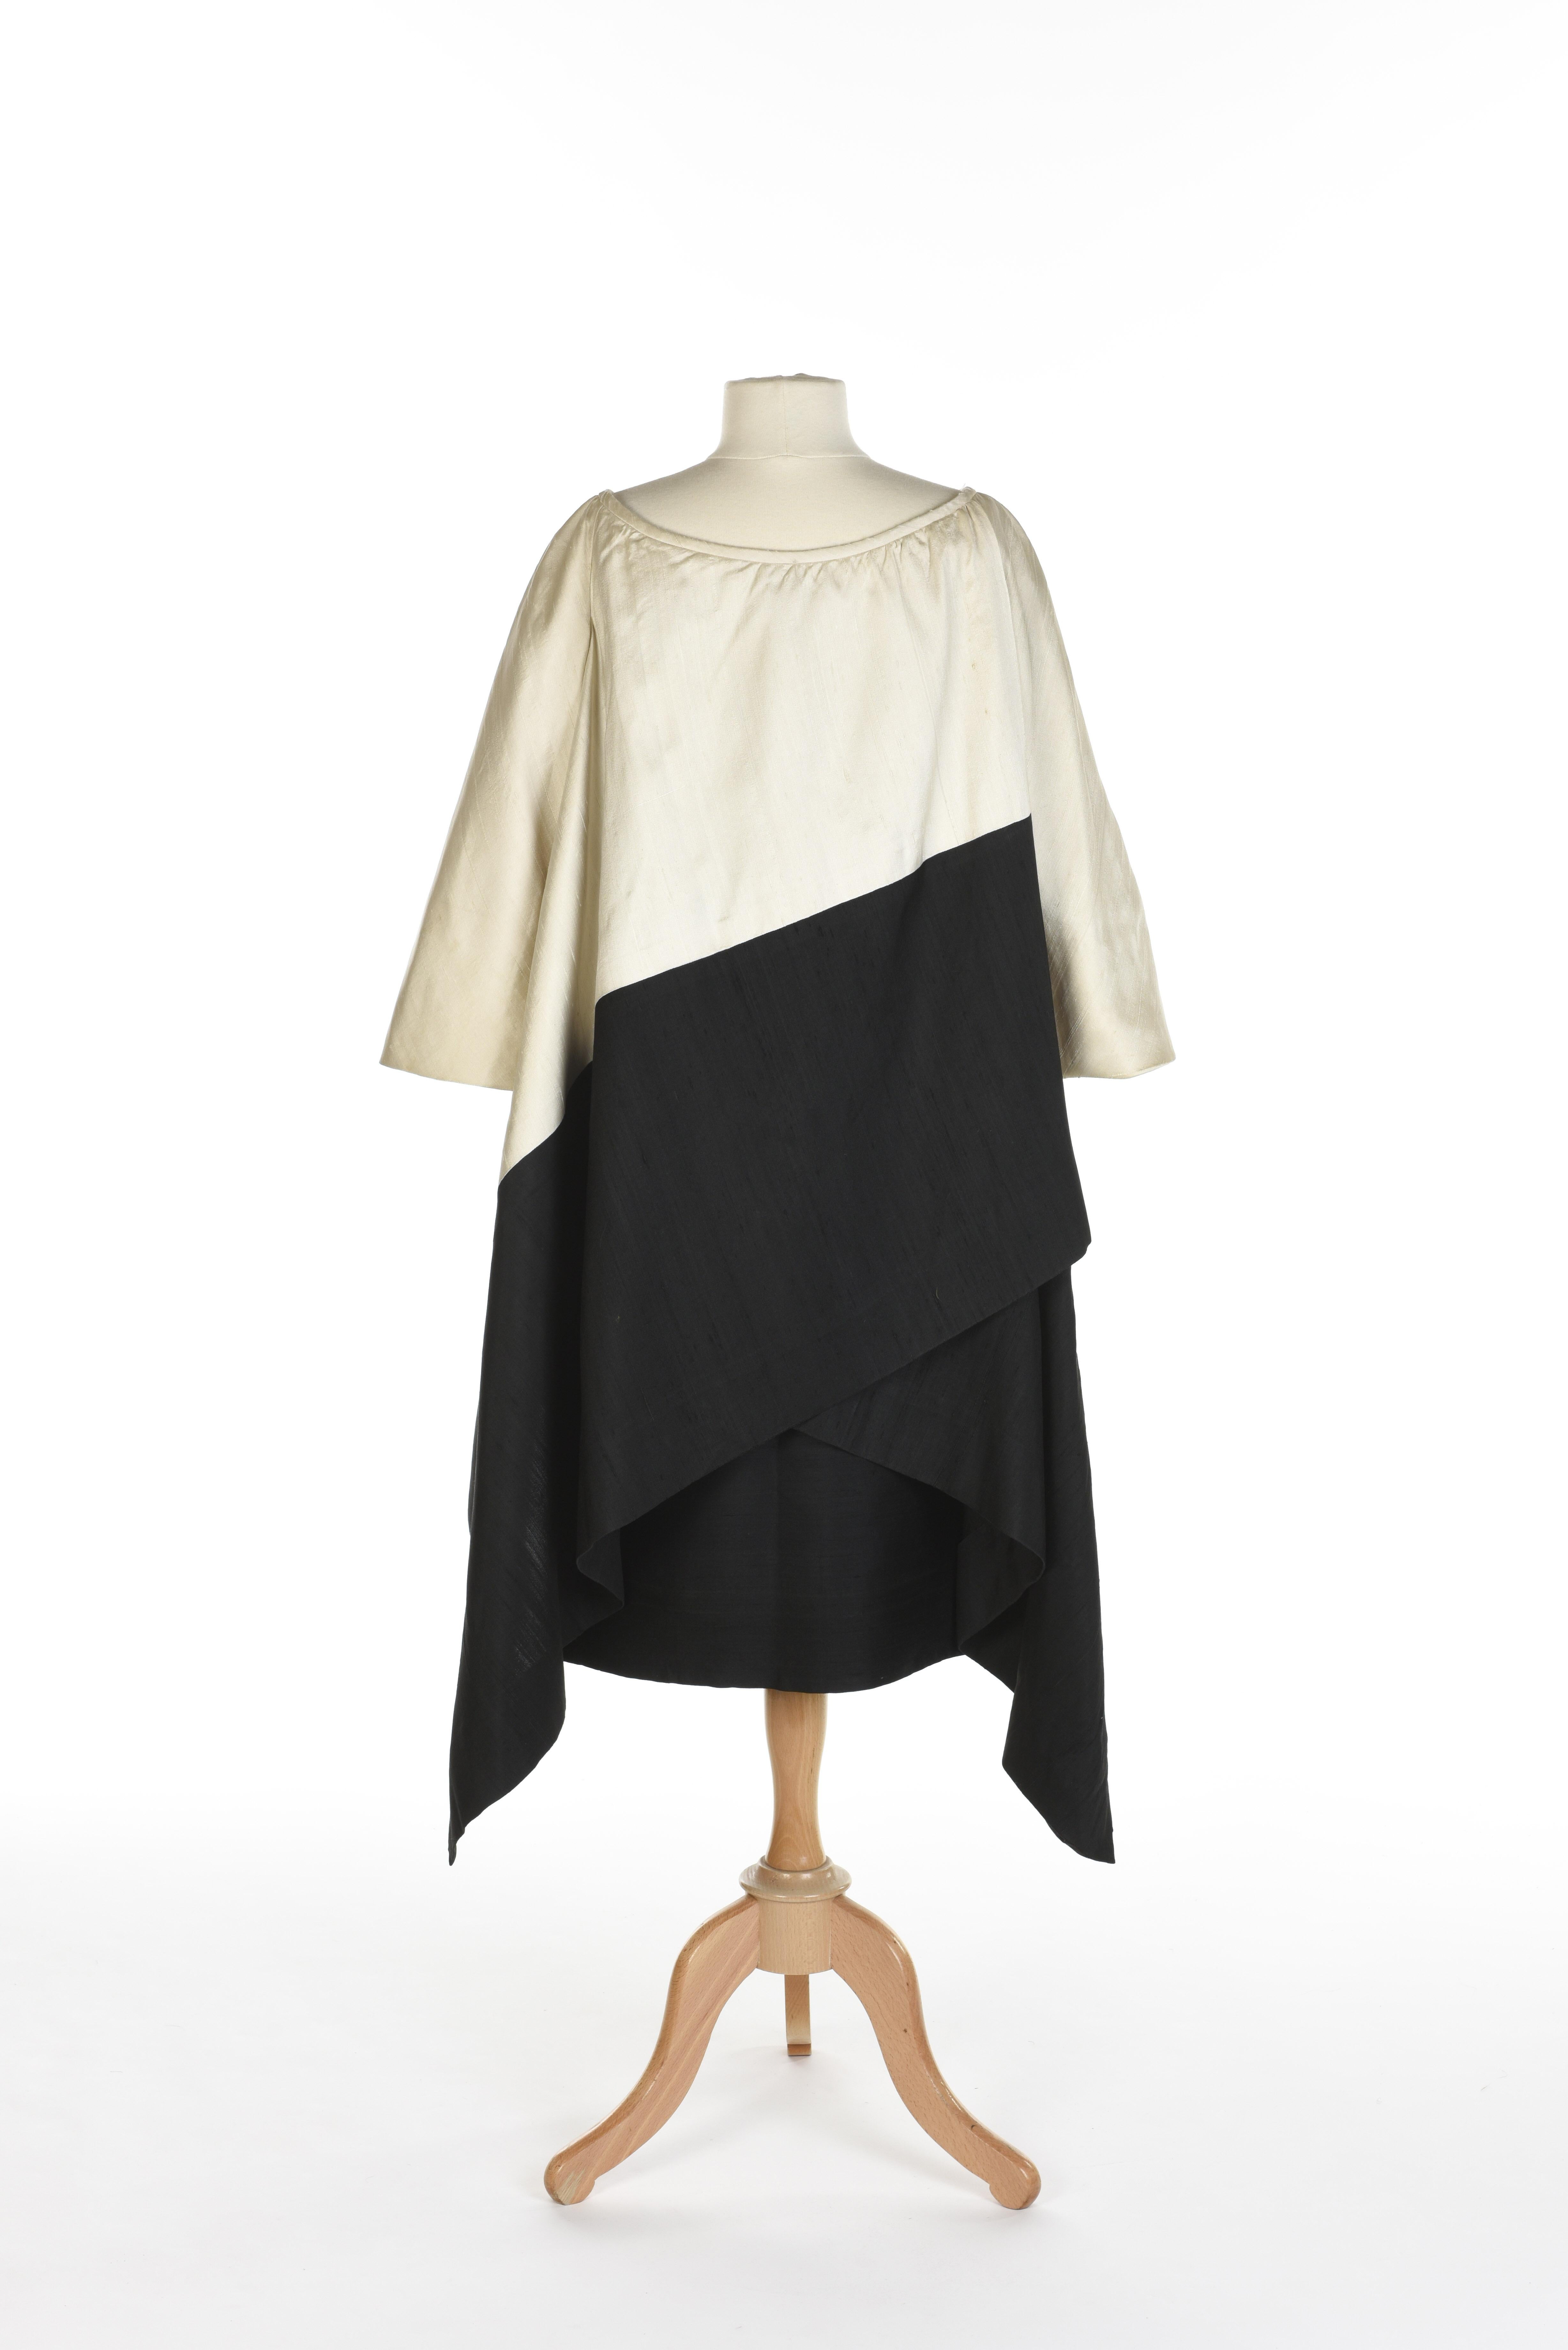 An Hubert de Givenchy French Couture Cream and Black silk Evening Set Circa 1965 For Sale 5